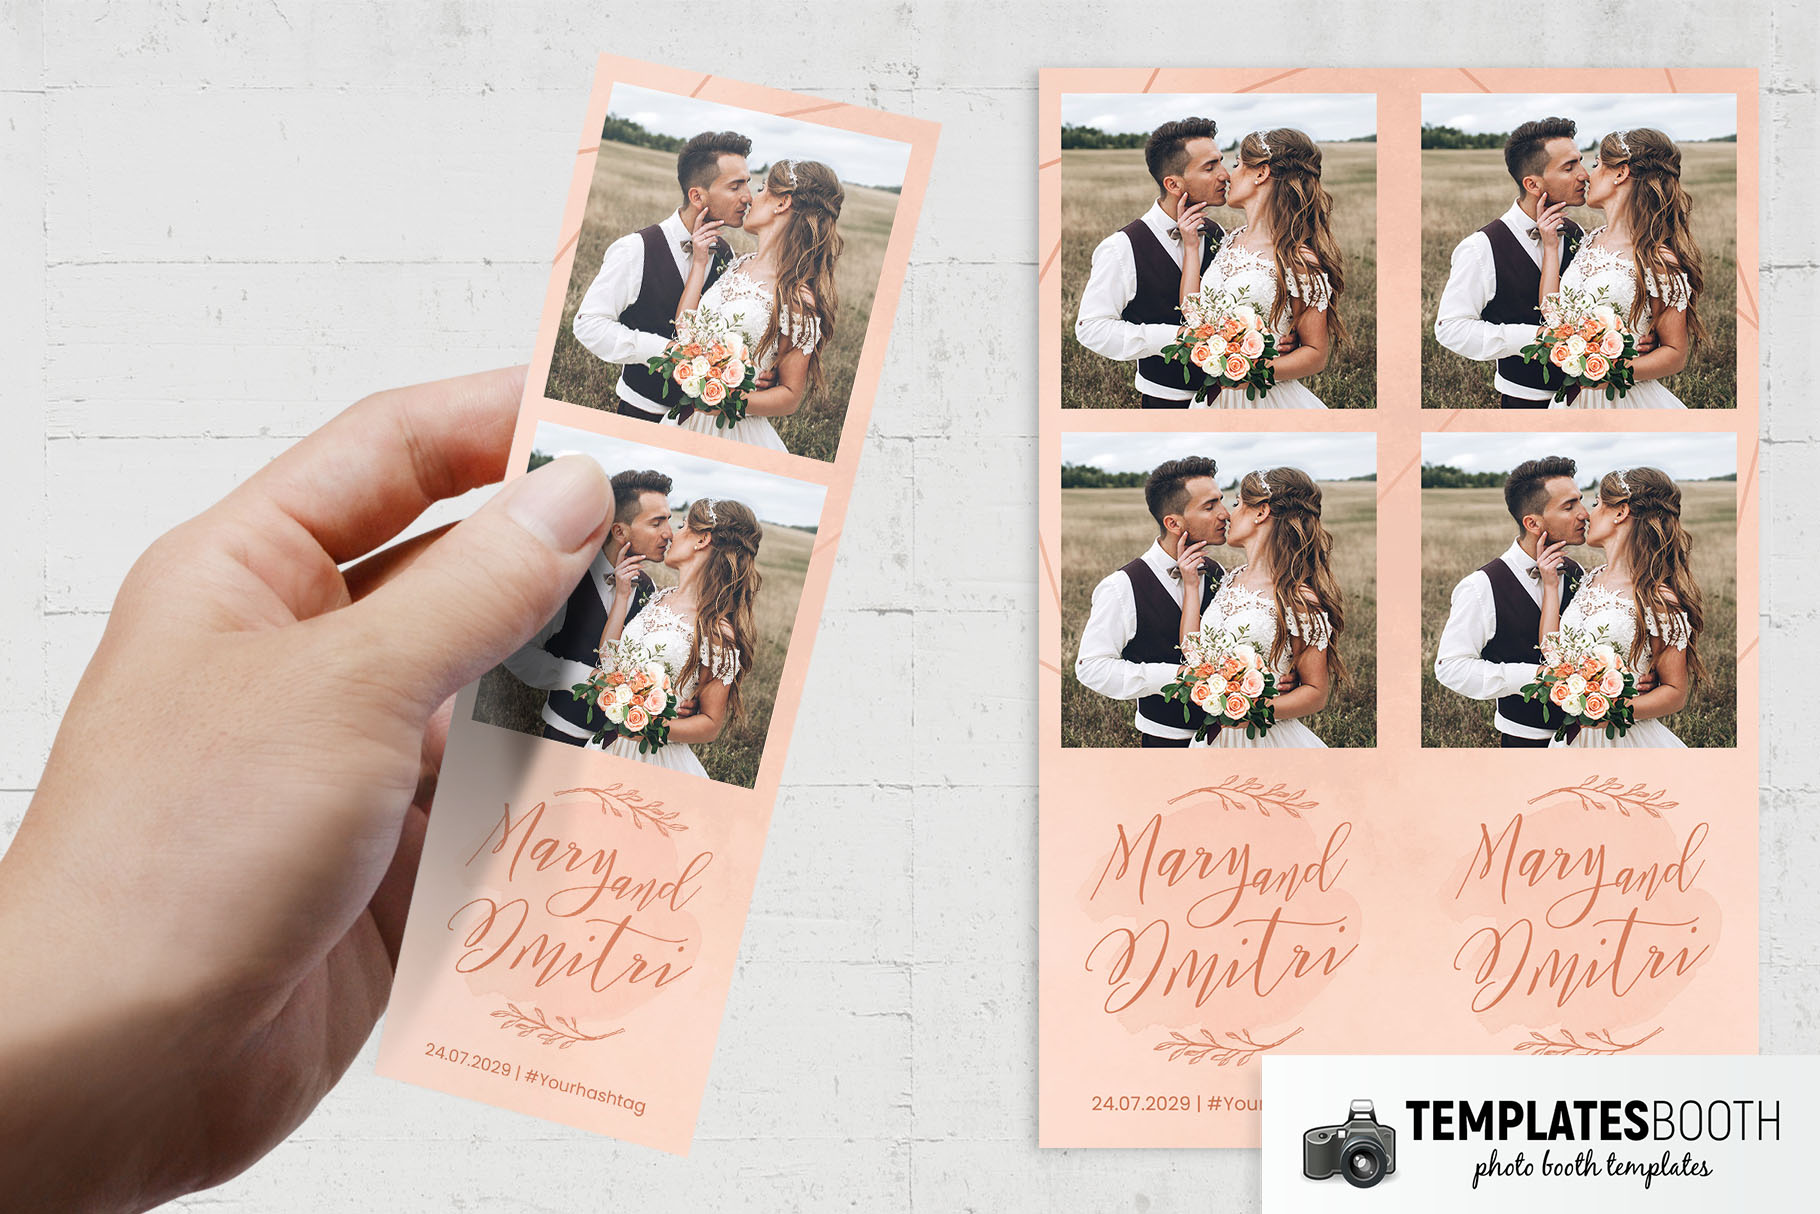 Just Peachy Wedding Photo Booth Template